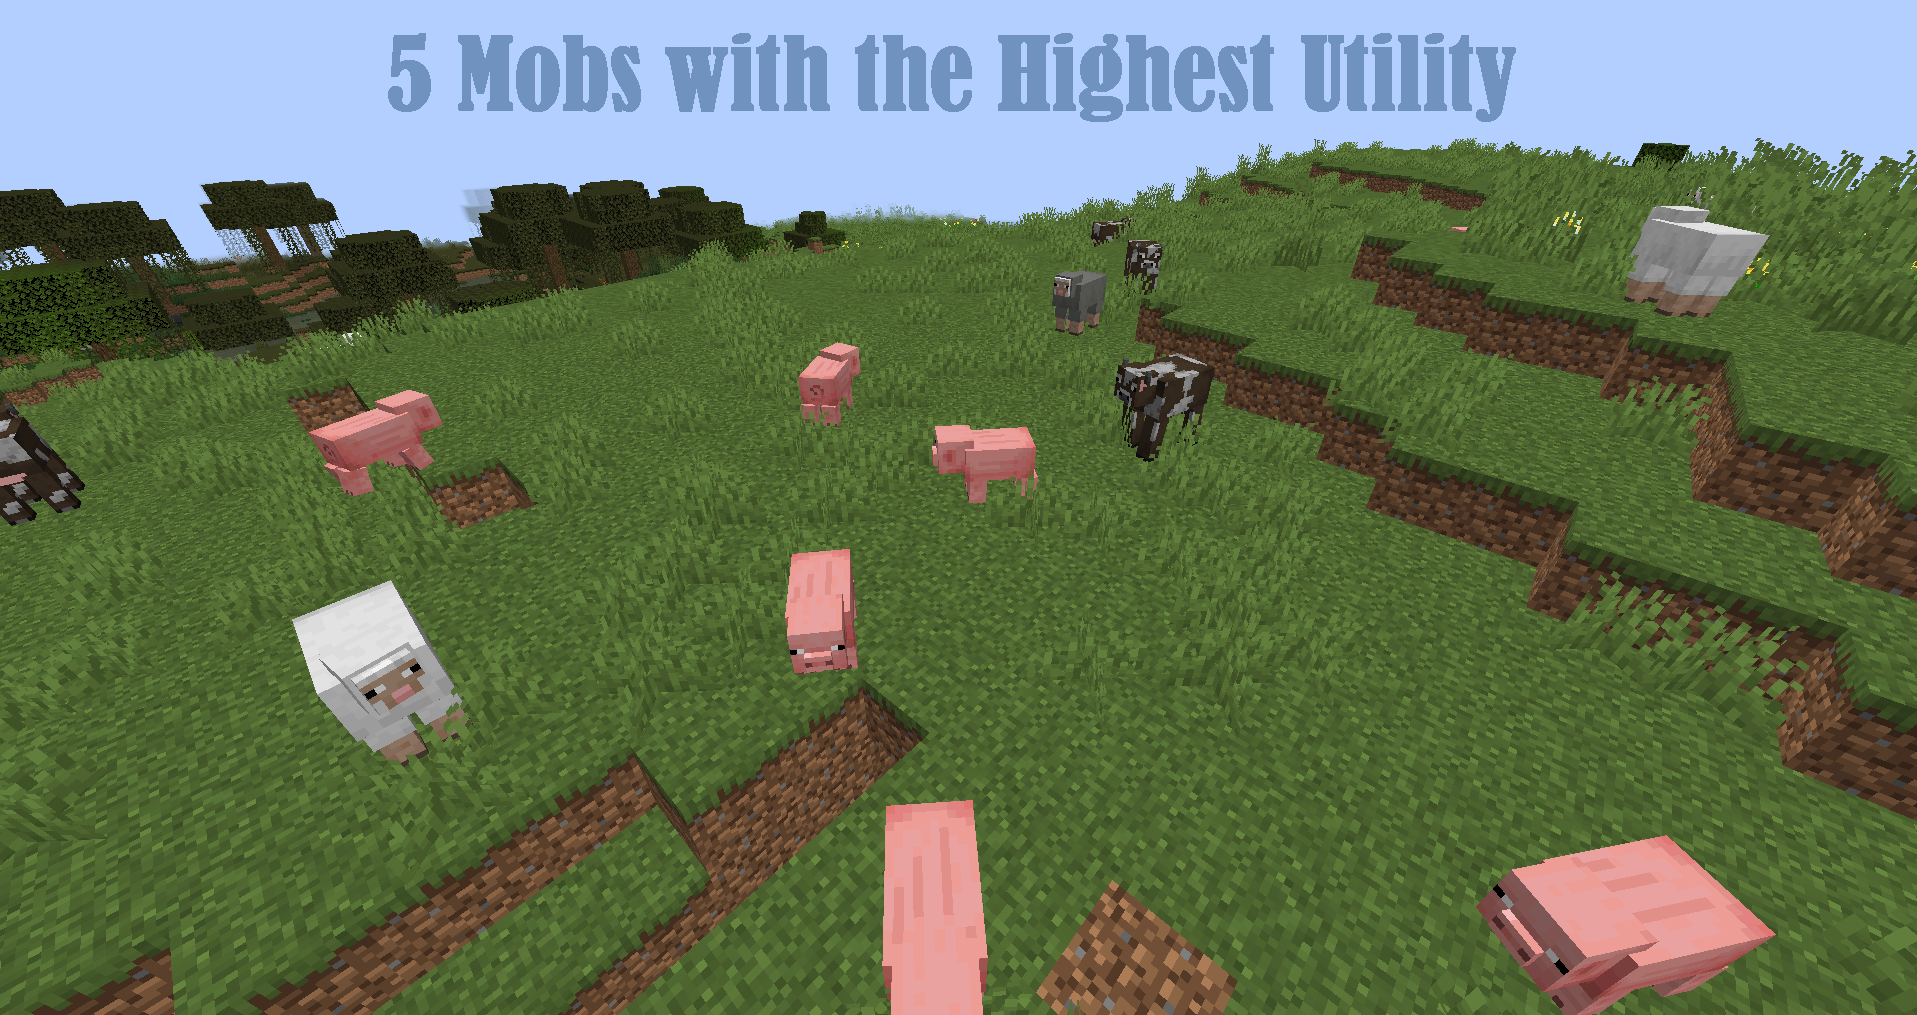 Top 5 Mobs With The Highest Utility in Minecraft